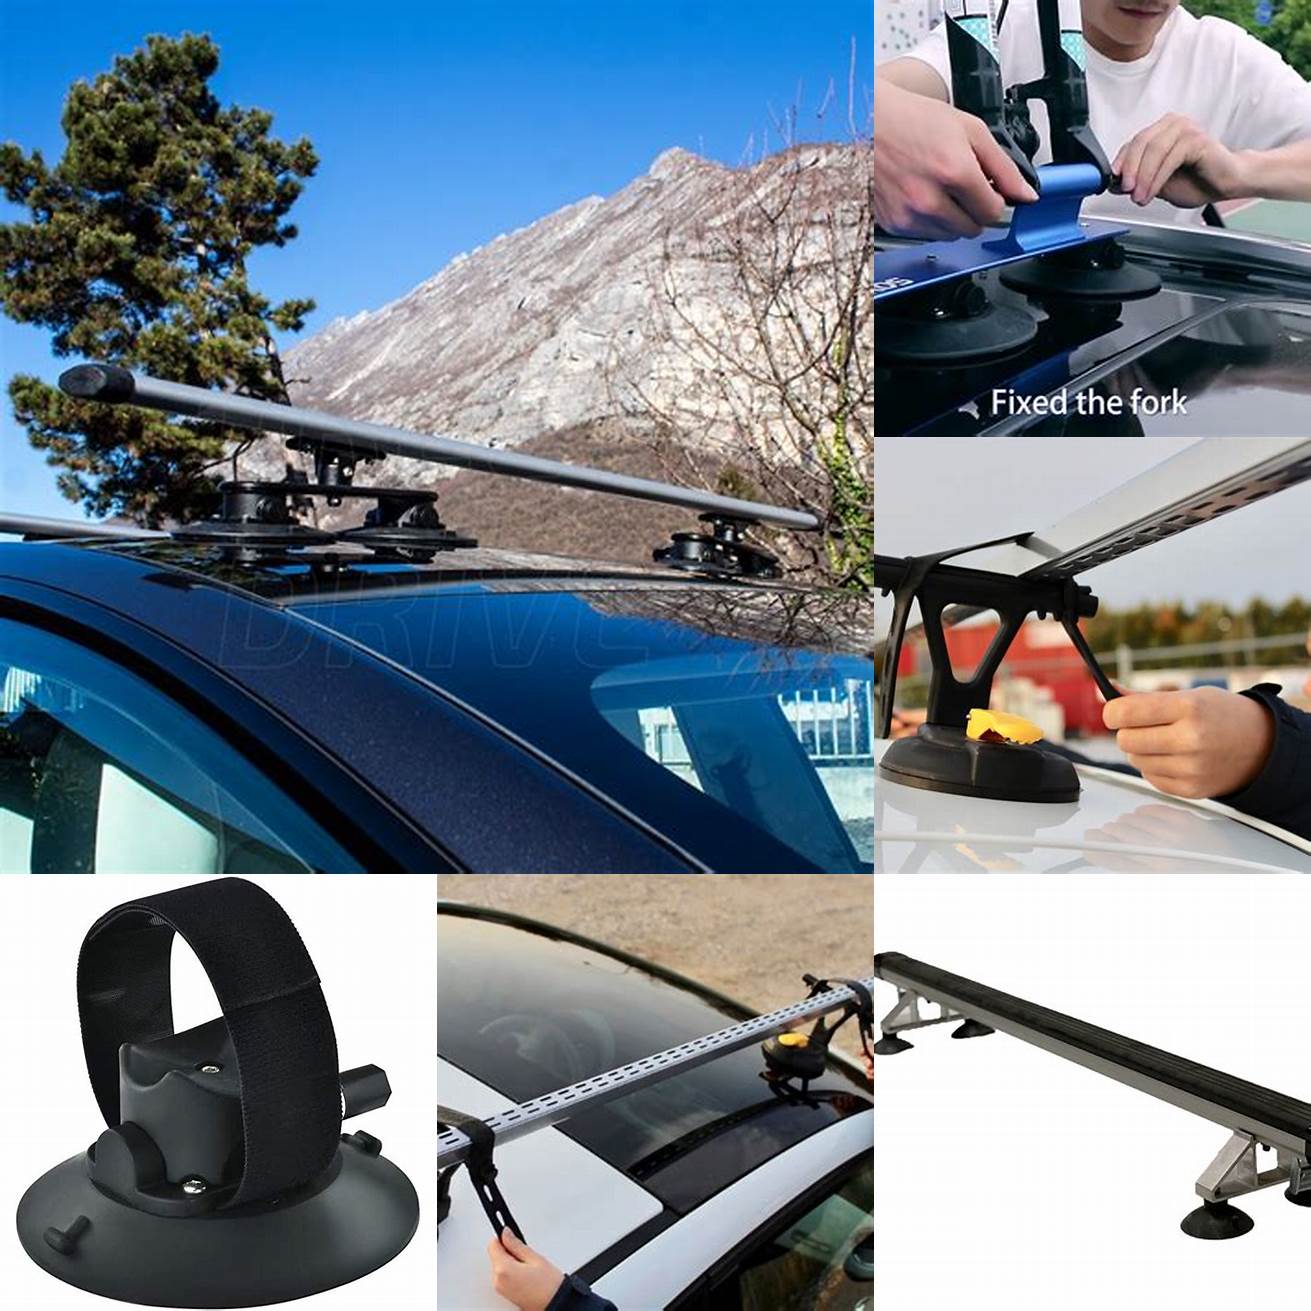 Rooftop rack jenis suction cup